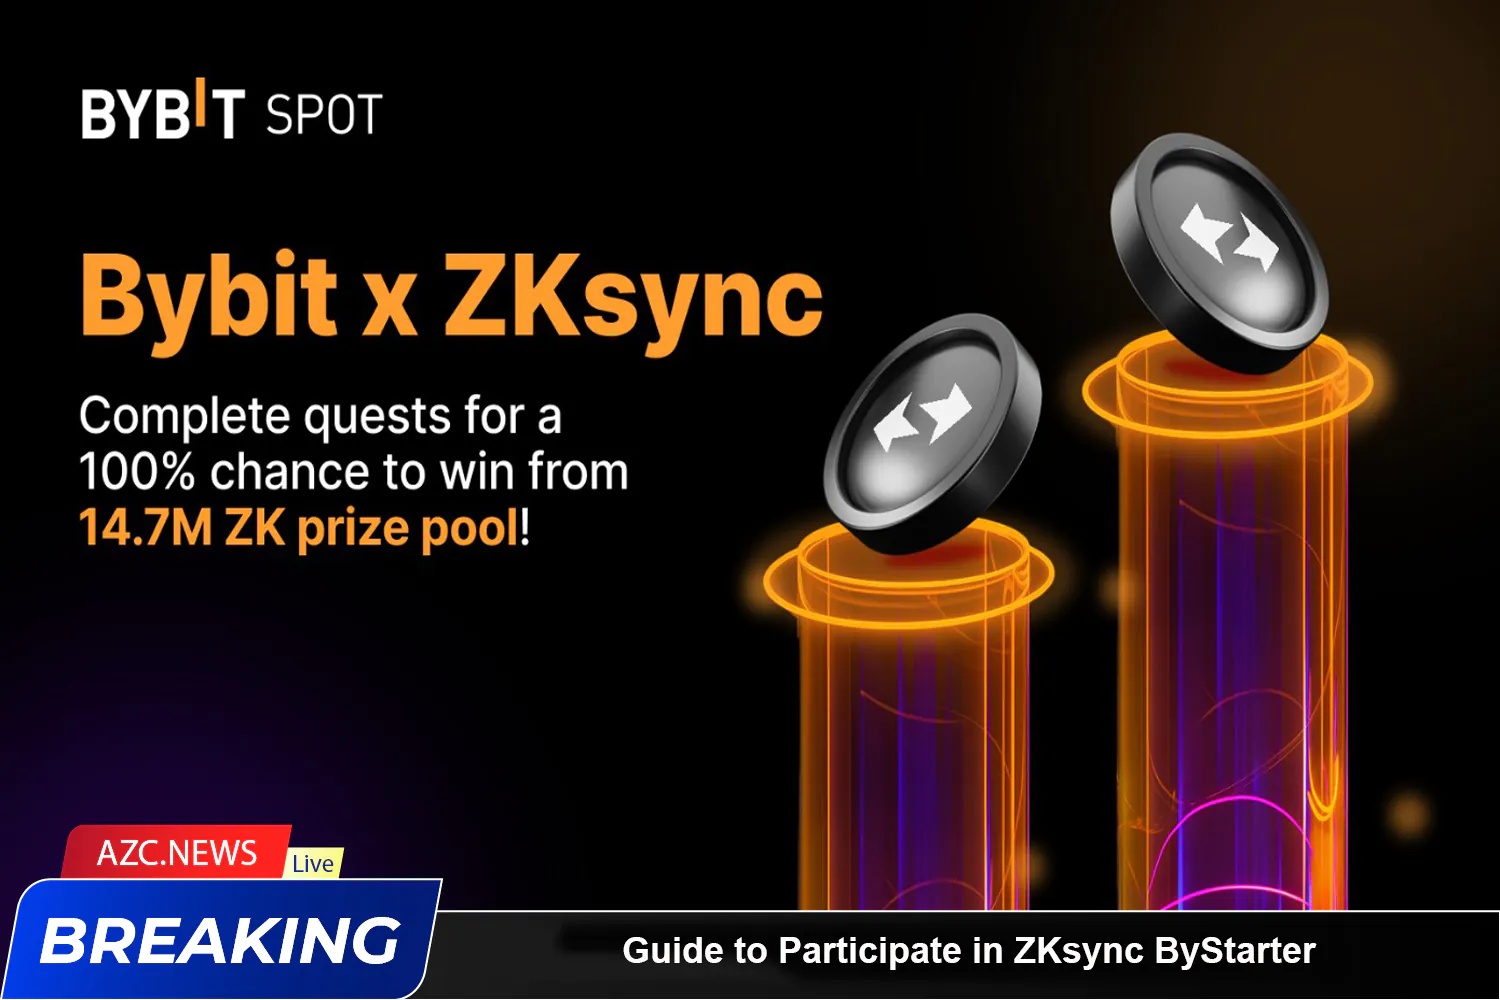 Guide To Participate In Zksync Bystarter And Earn Zk Tokens On Bybit